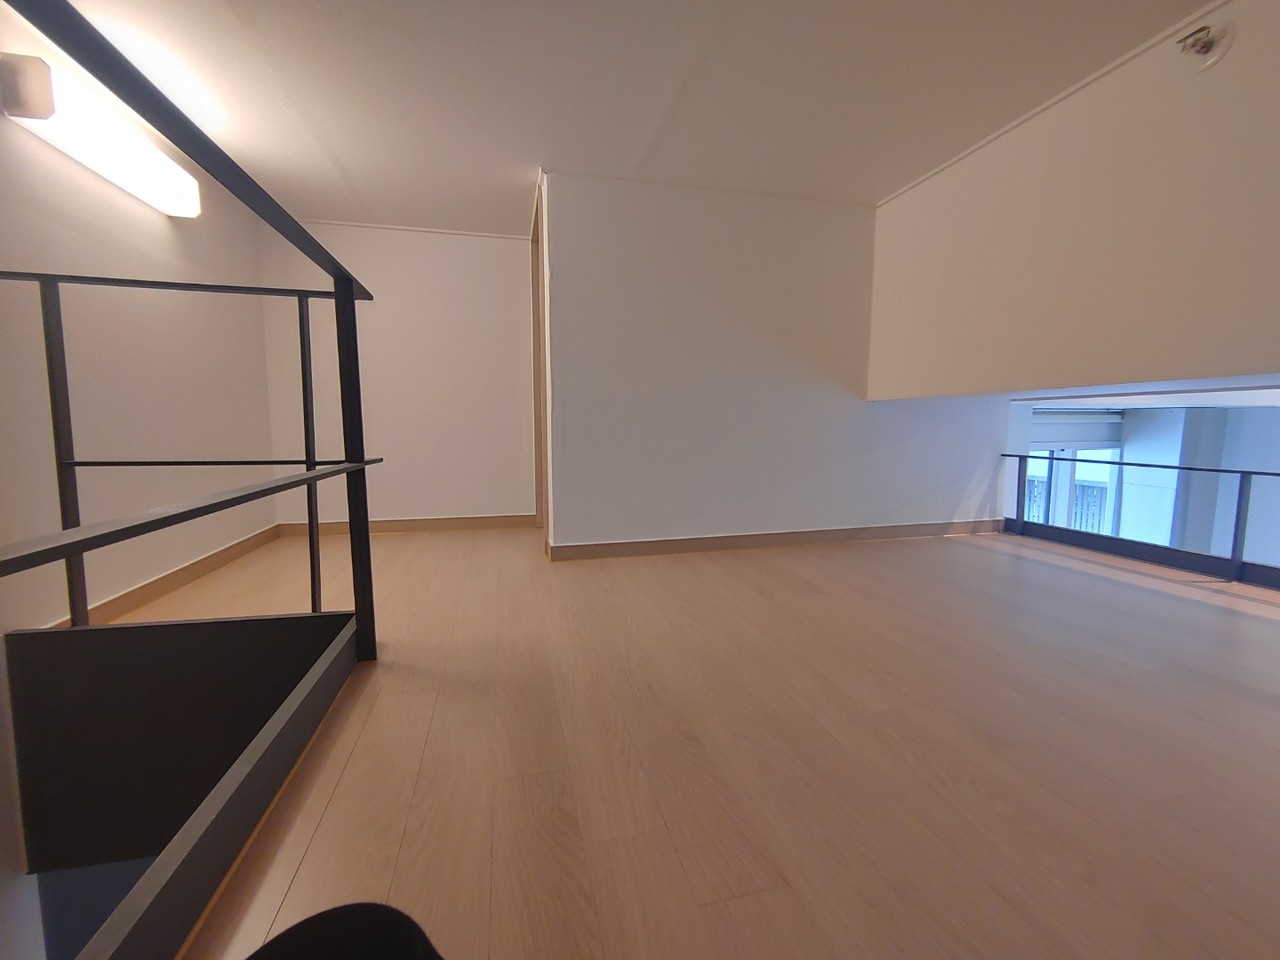 <p>&nbsp;</p><p style="text-align: left; font-weight: bold; font-size: 30px;">Use the Loft as guest room</p><p style="font-size: 20px; text-align: left;">Every room in E-2 House has its own loft. Invite your friend or use it as your secret space.</p>